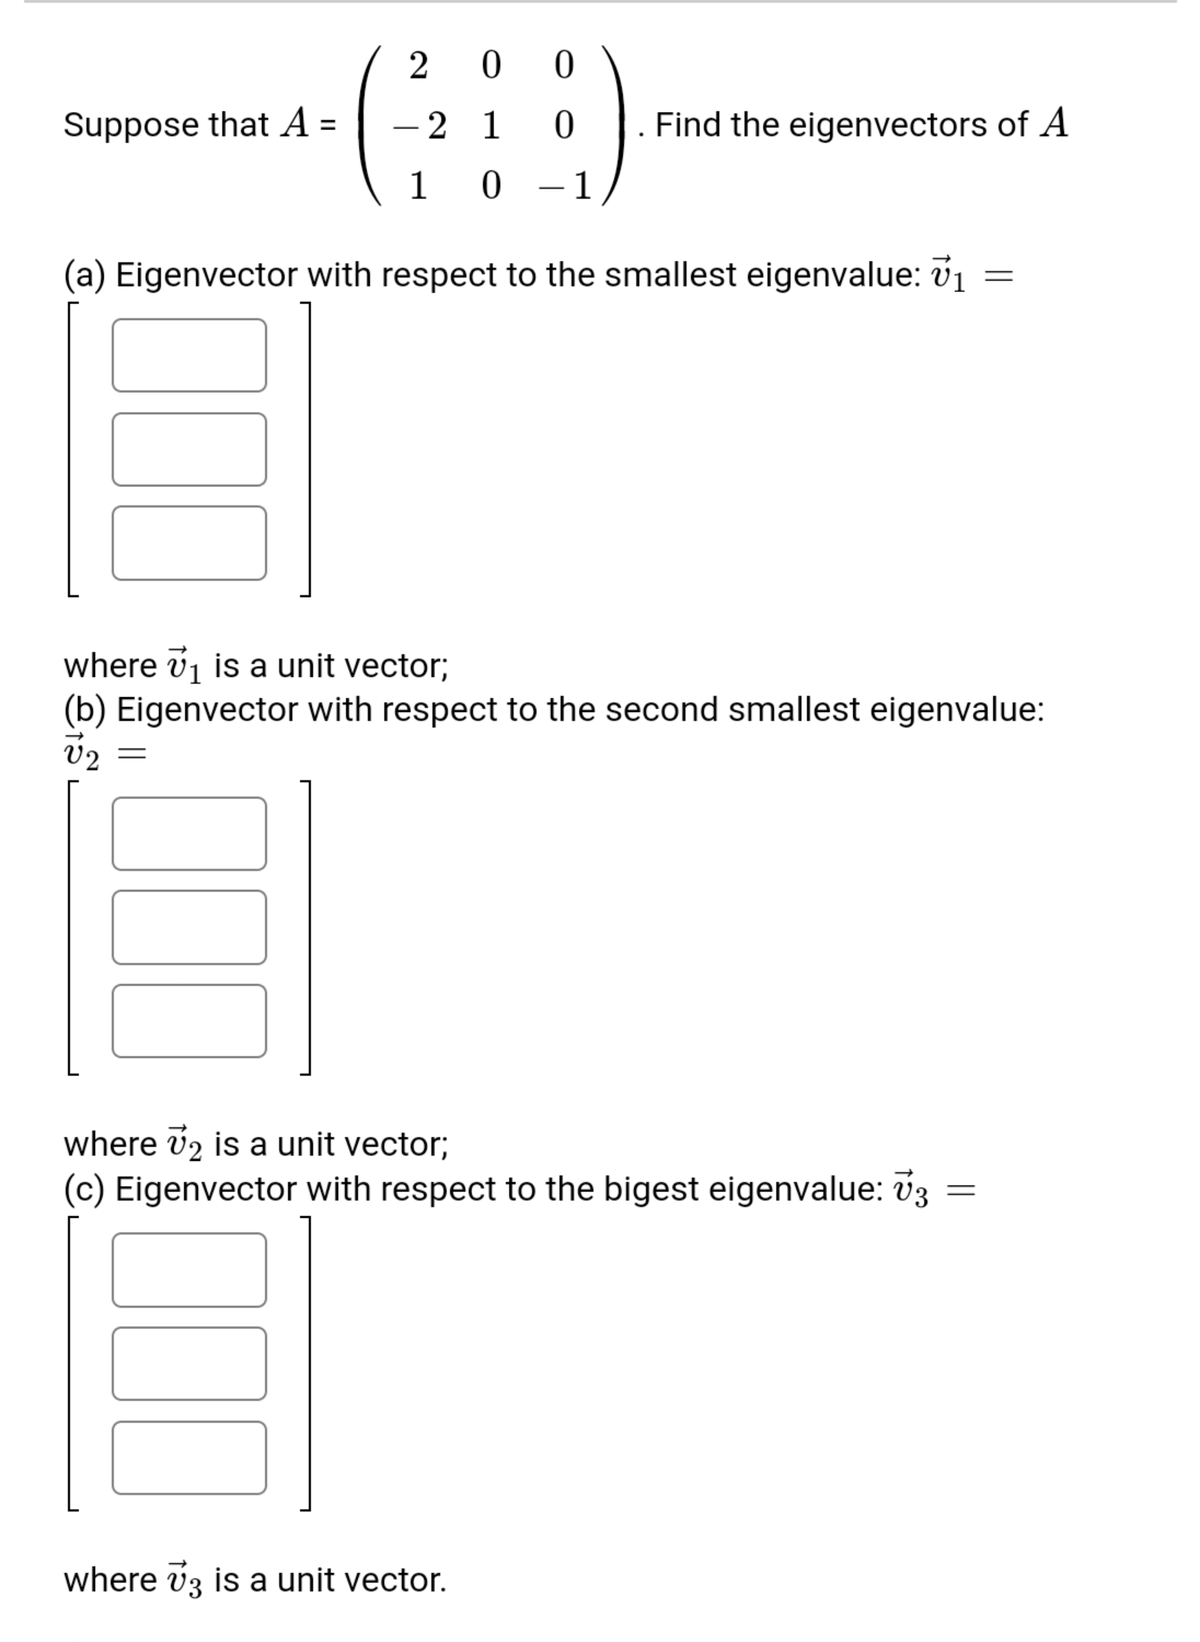 2 0 0
Suppose that A =
-2 1
ㅇ
Find the eigenvectors of A
1
-1
(a) Eigenvector with respect to the smallest eigenvalue: v1
where v1 is a unit vector;
(b) Eigenvector with respect to the second smallest eigenvalue:
V2
where v2 is a unit vector;
(c) Eigenvector with respect to the bigest eigenvalue: v3
where vz is a unit vector.
